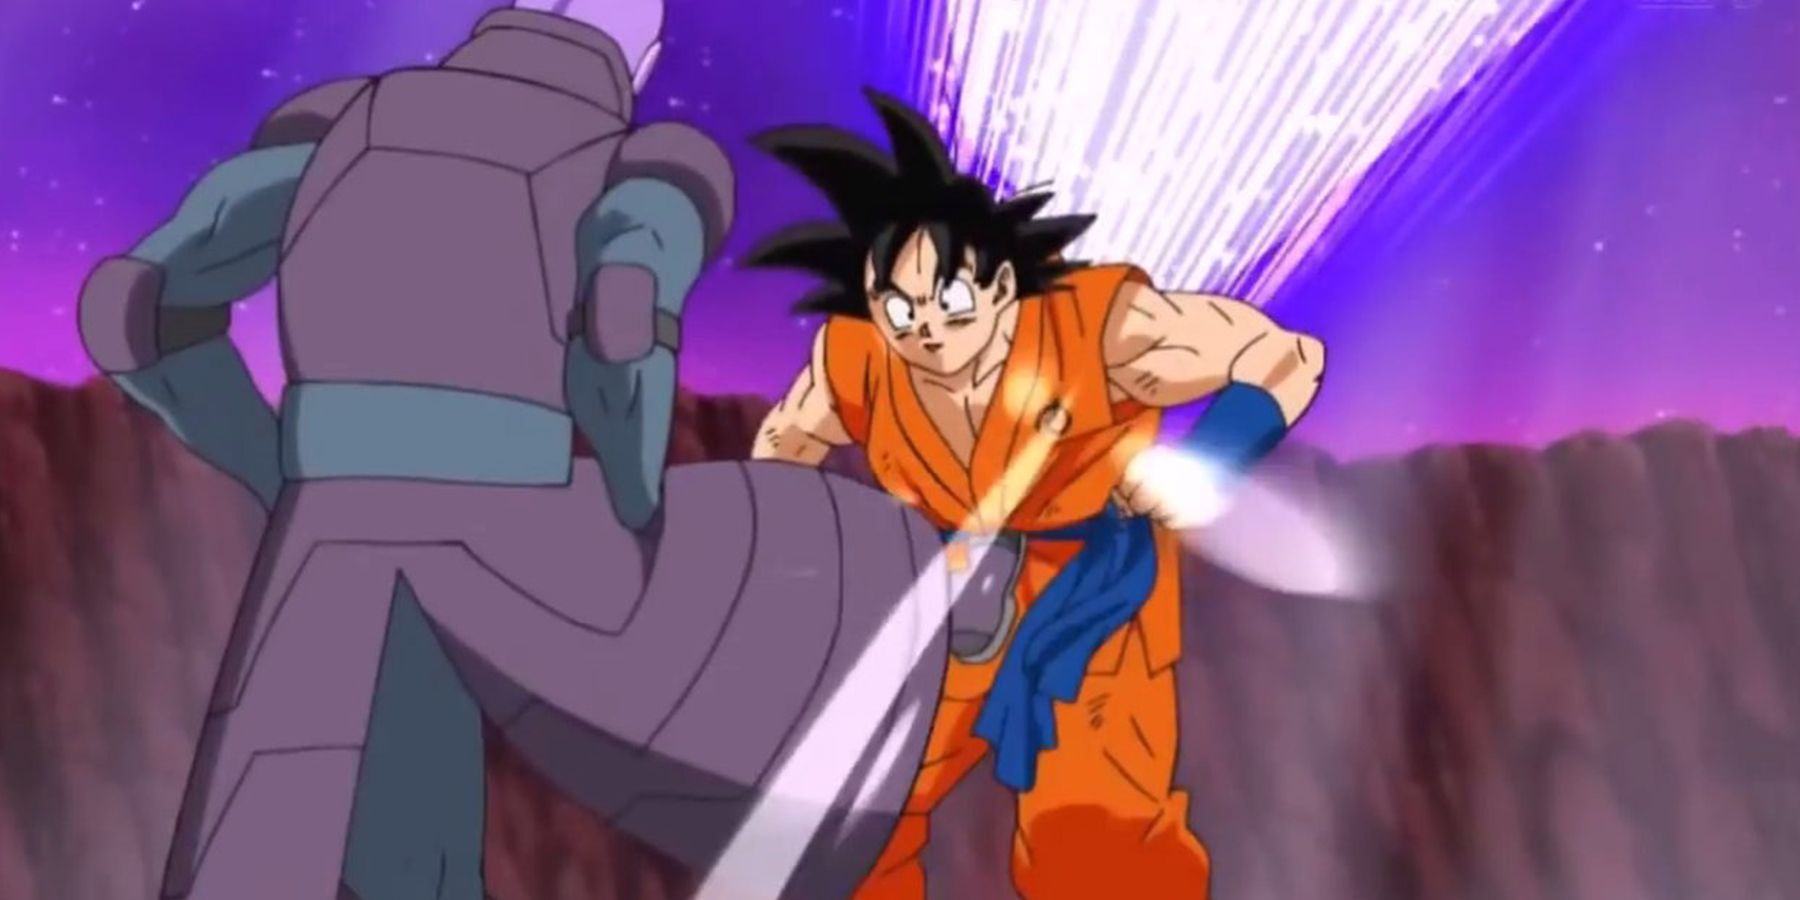 Goku fights hit in the Tournament of Destroyers in Dragon Ball Super.